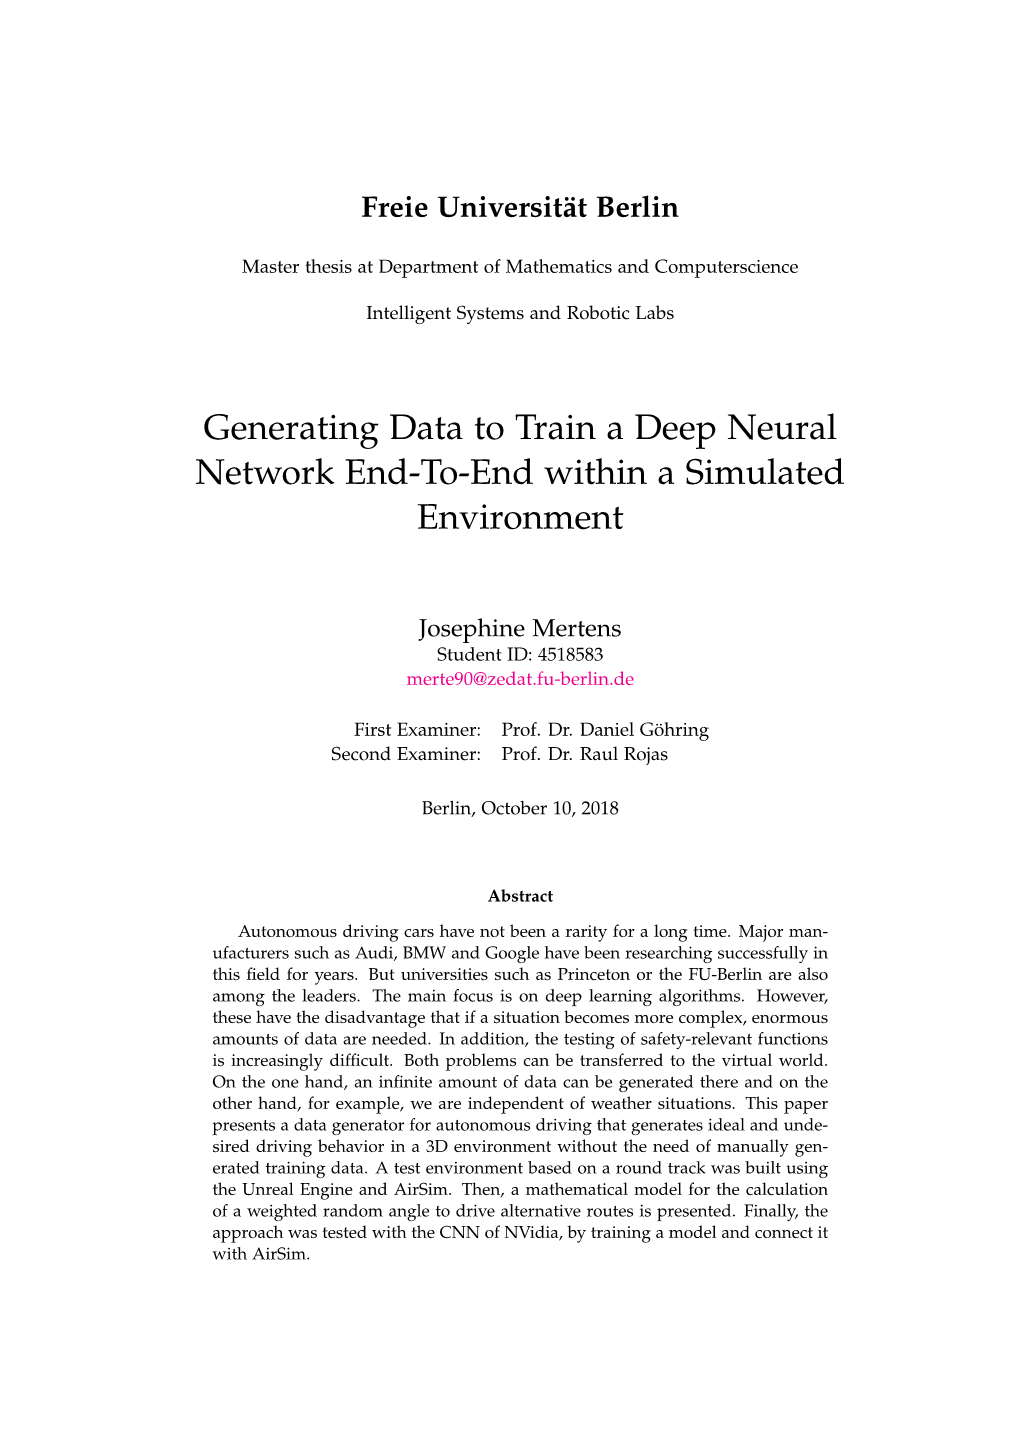 Generating Data to Train a Deep Neural Network End-To-End Within a Simulated Environment